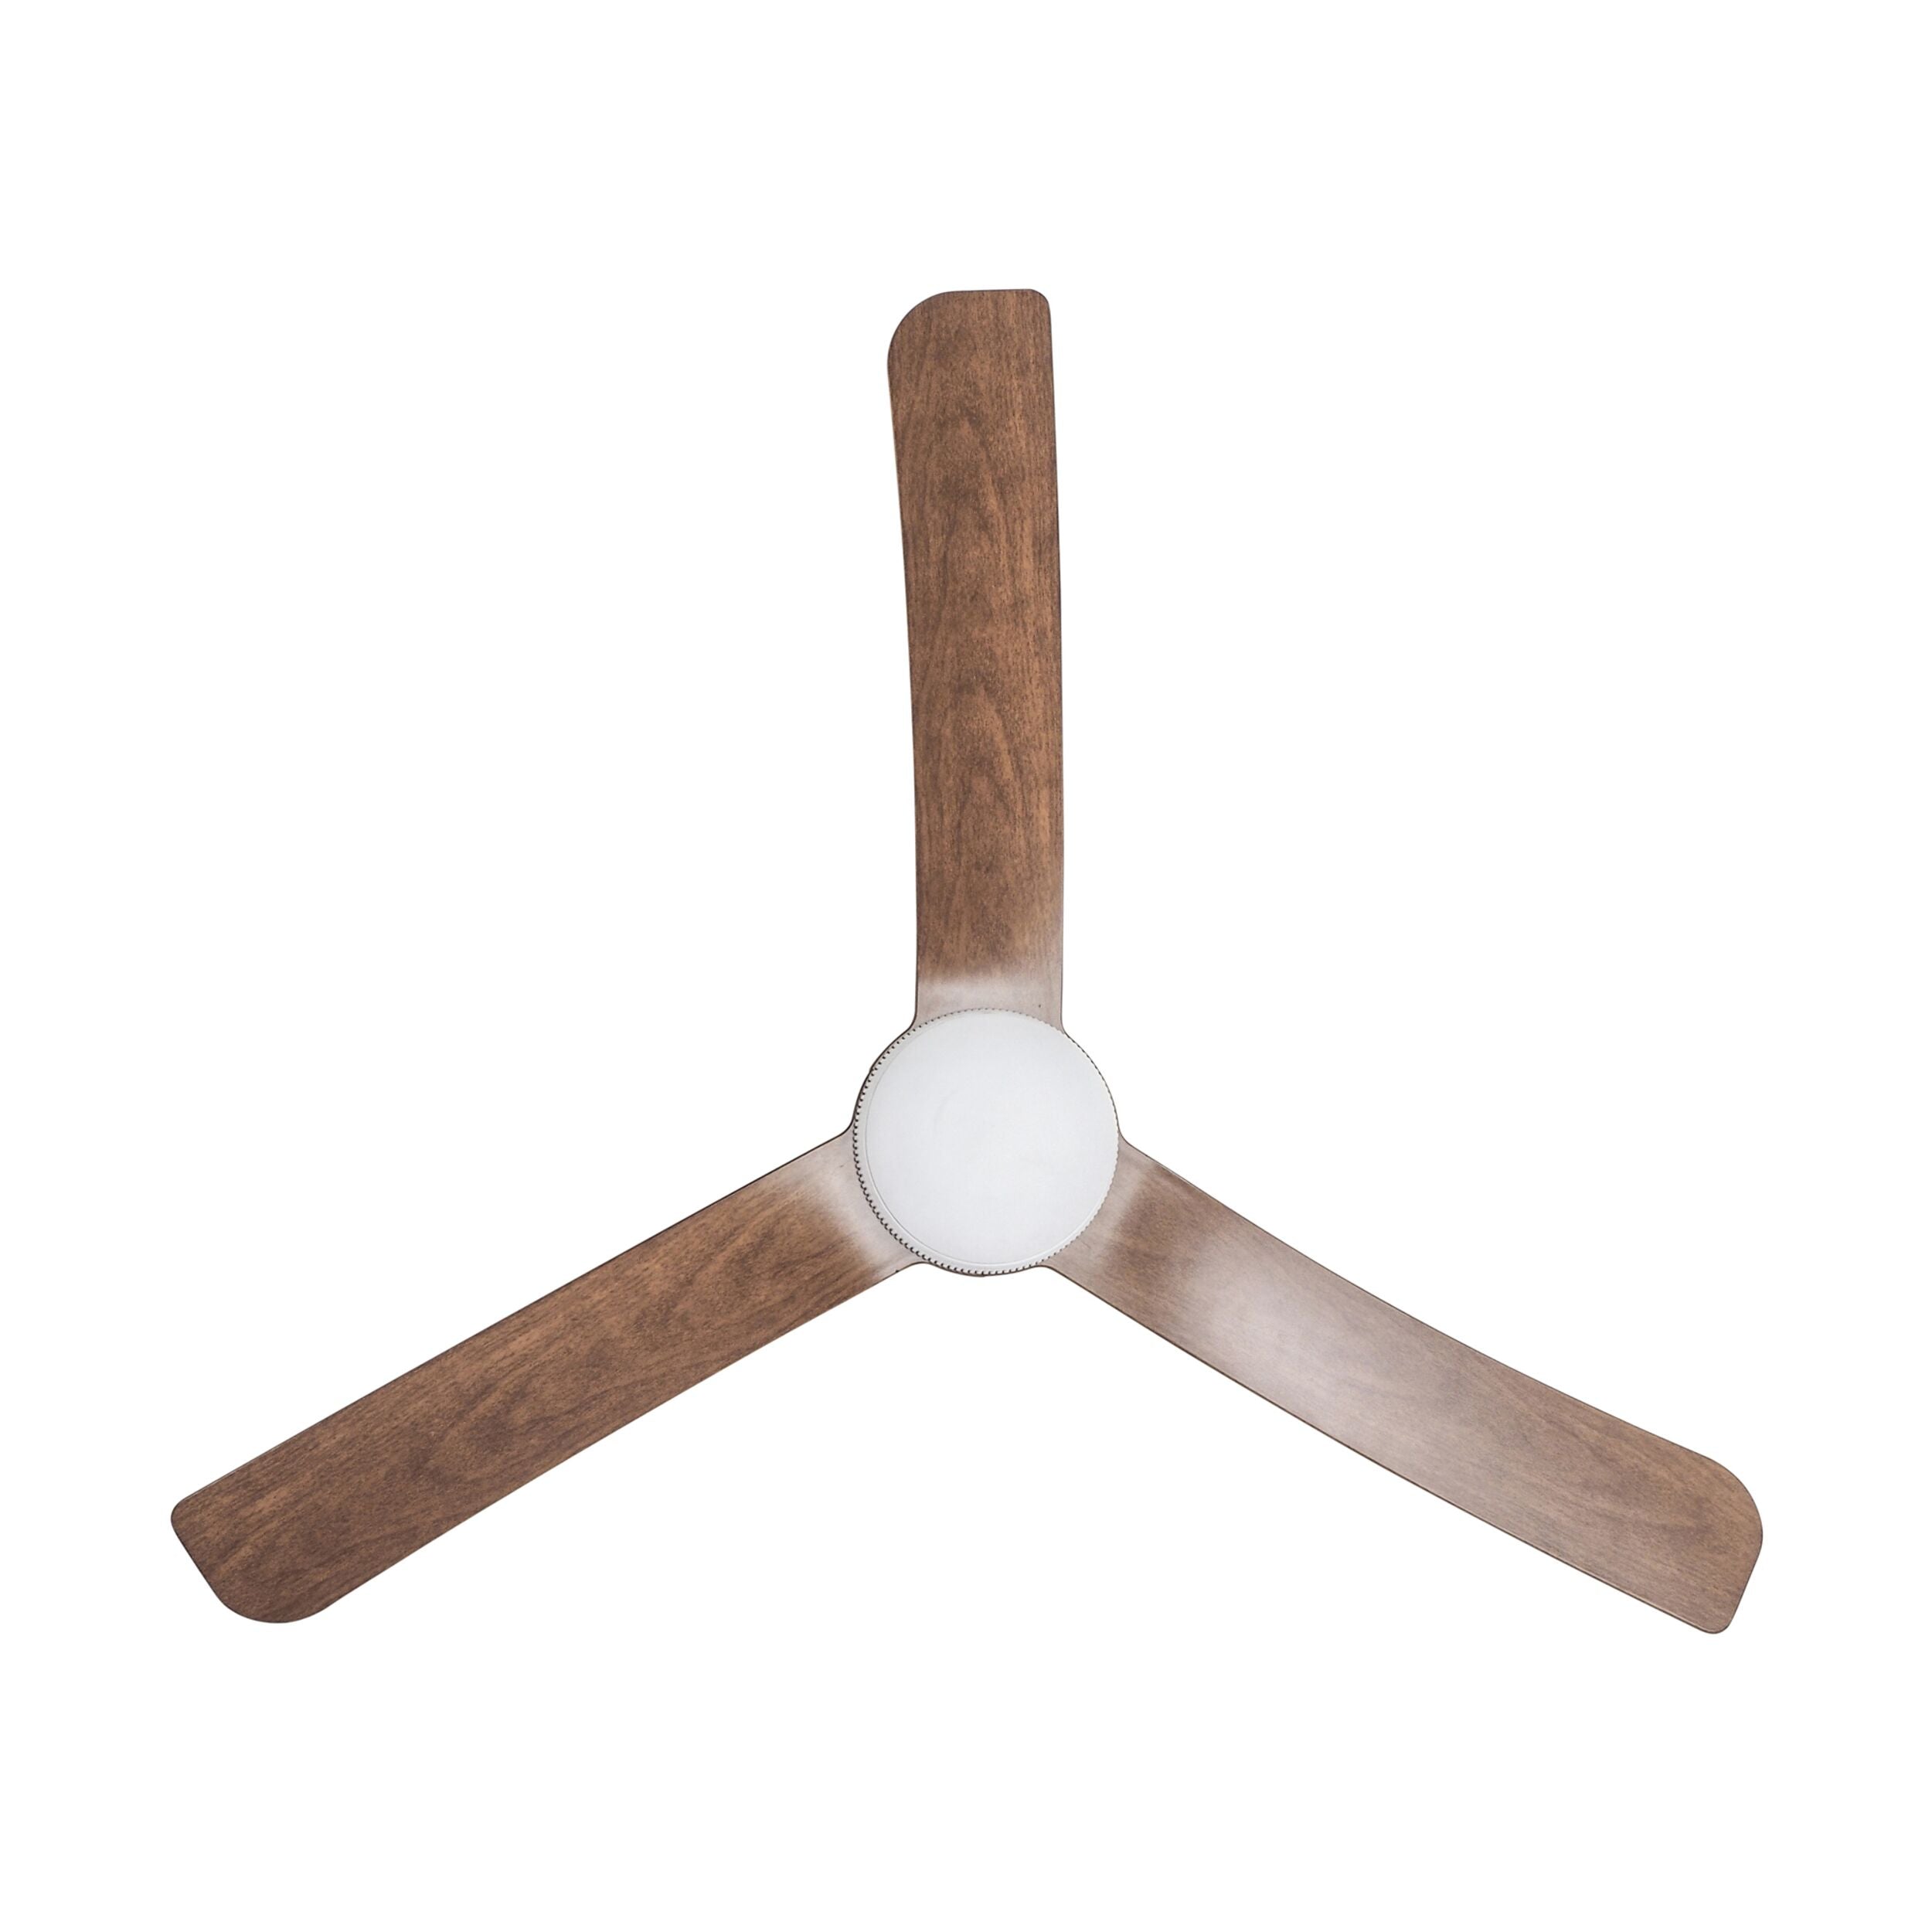 Moreton Indoor/Outdoor DC Fan with Remote - White & Hickory Finish 132cm